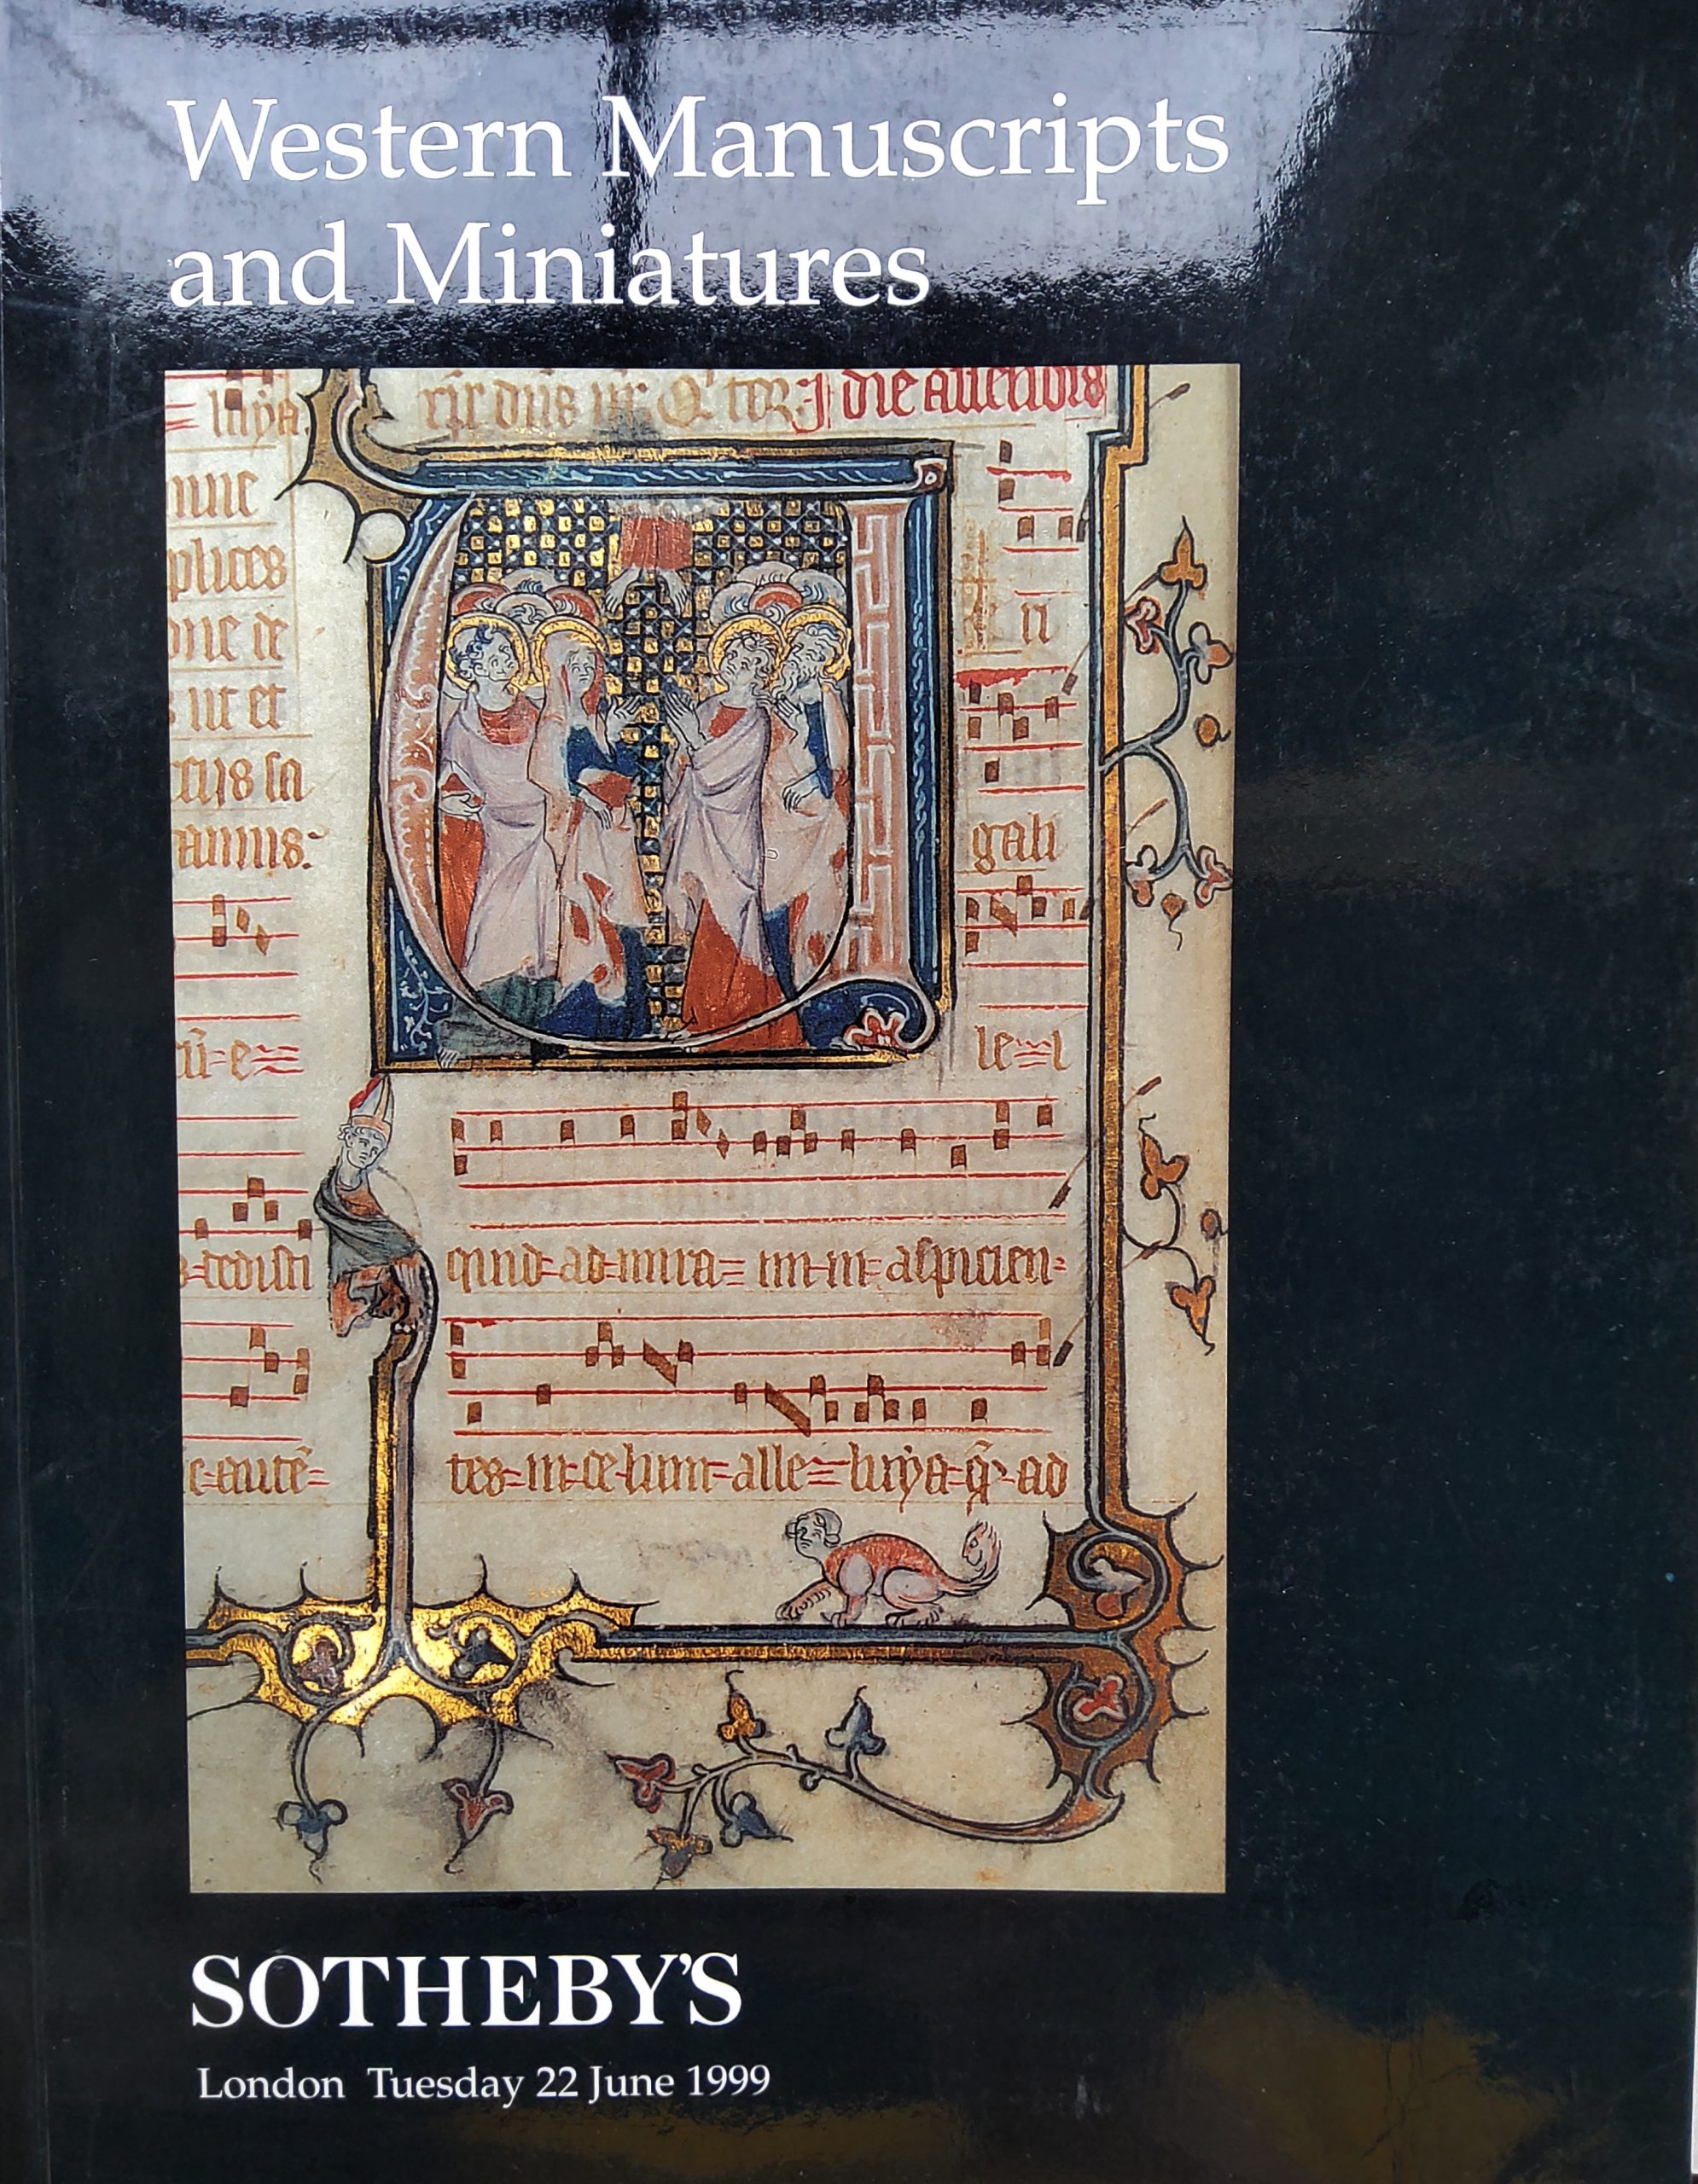 Sotheby’s Catalogues of Western Manuscripts and Miniatures; 12 vols; Complete collection 20 June 1995 to 22 June 1999.